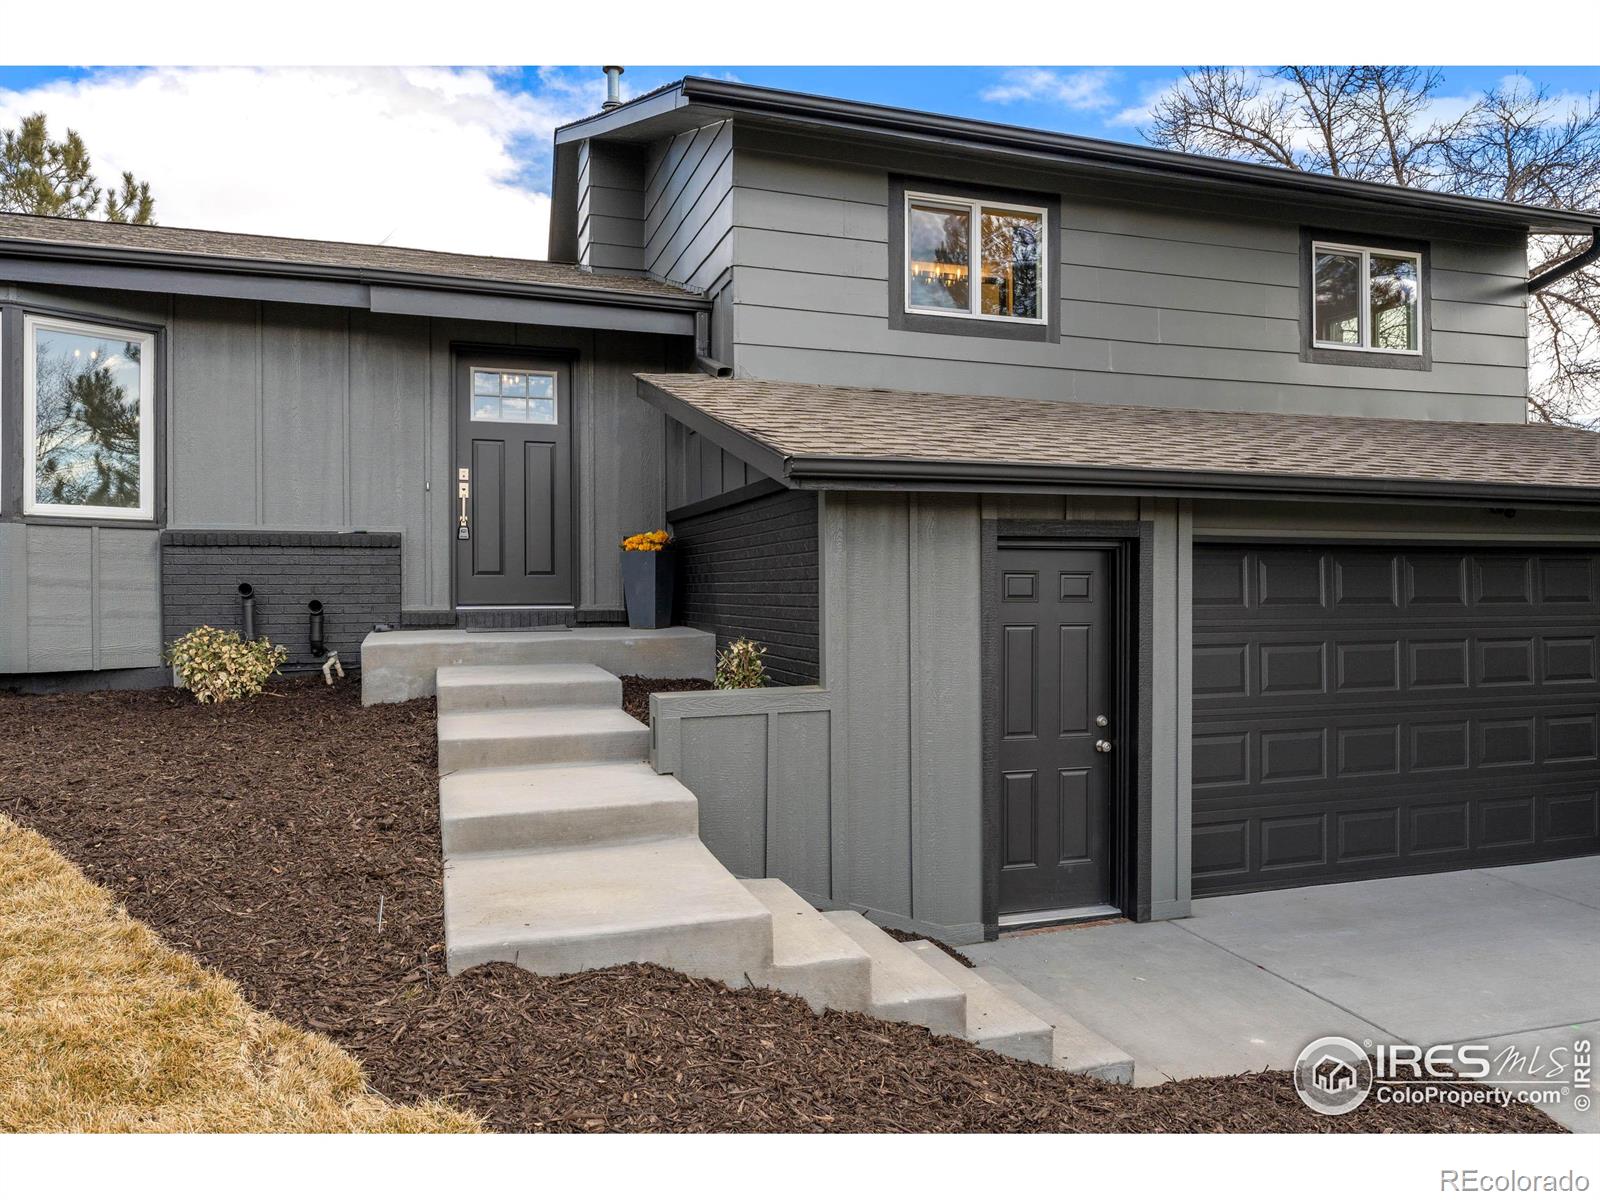 Report Image for 3706  Yale Way,Longmont, Colorado